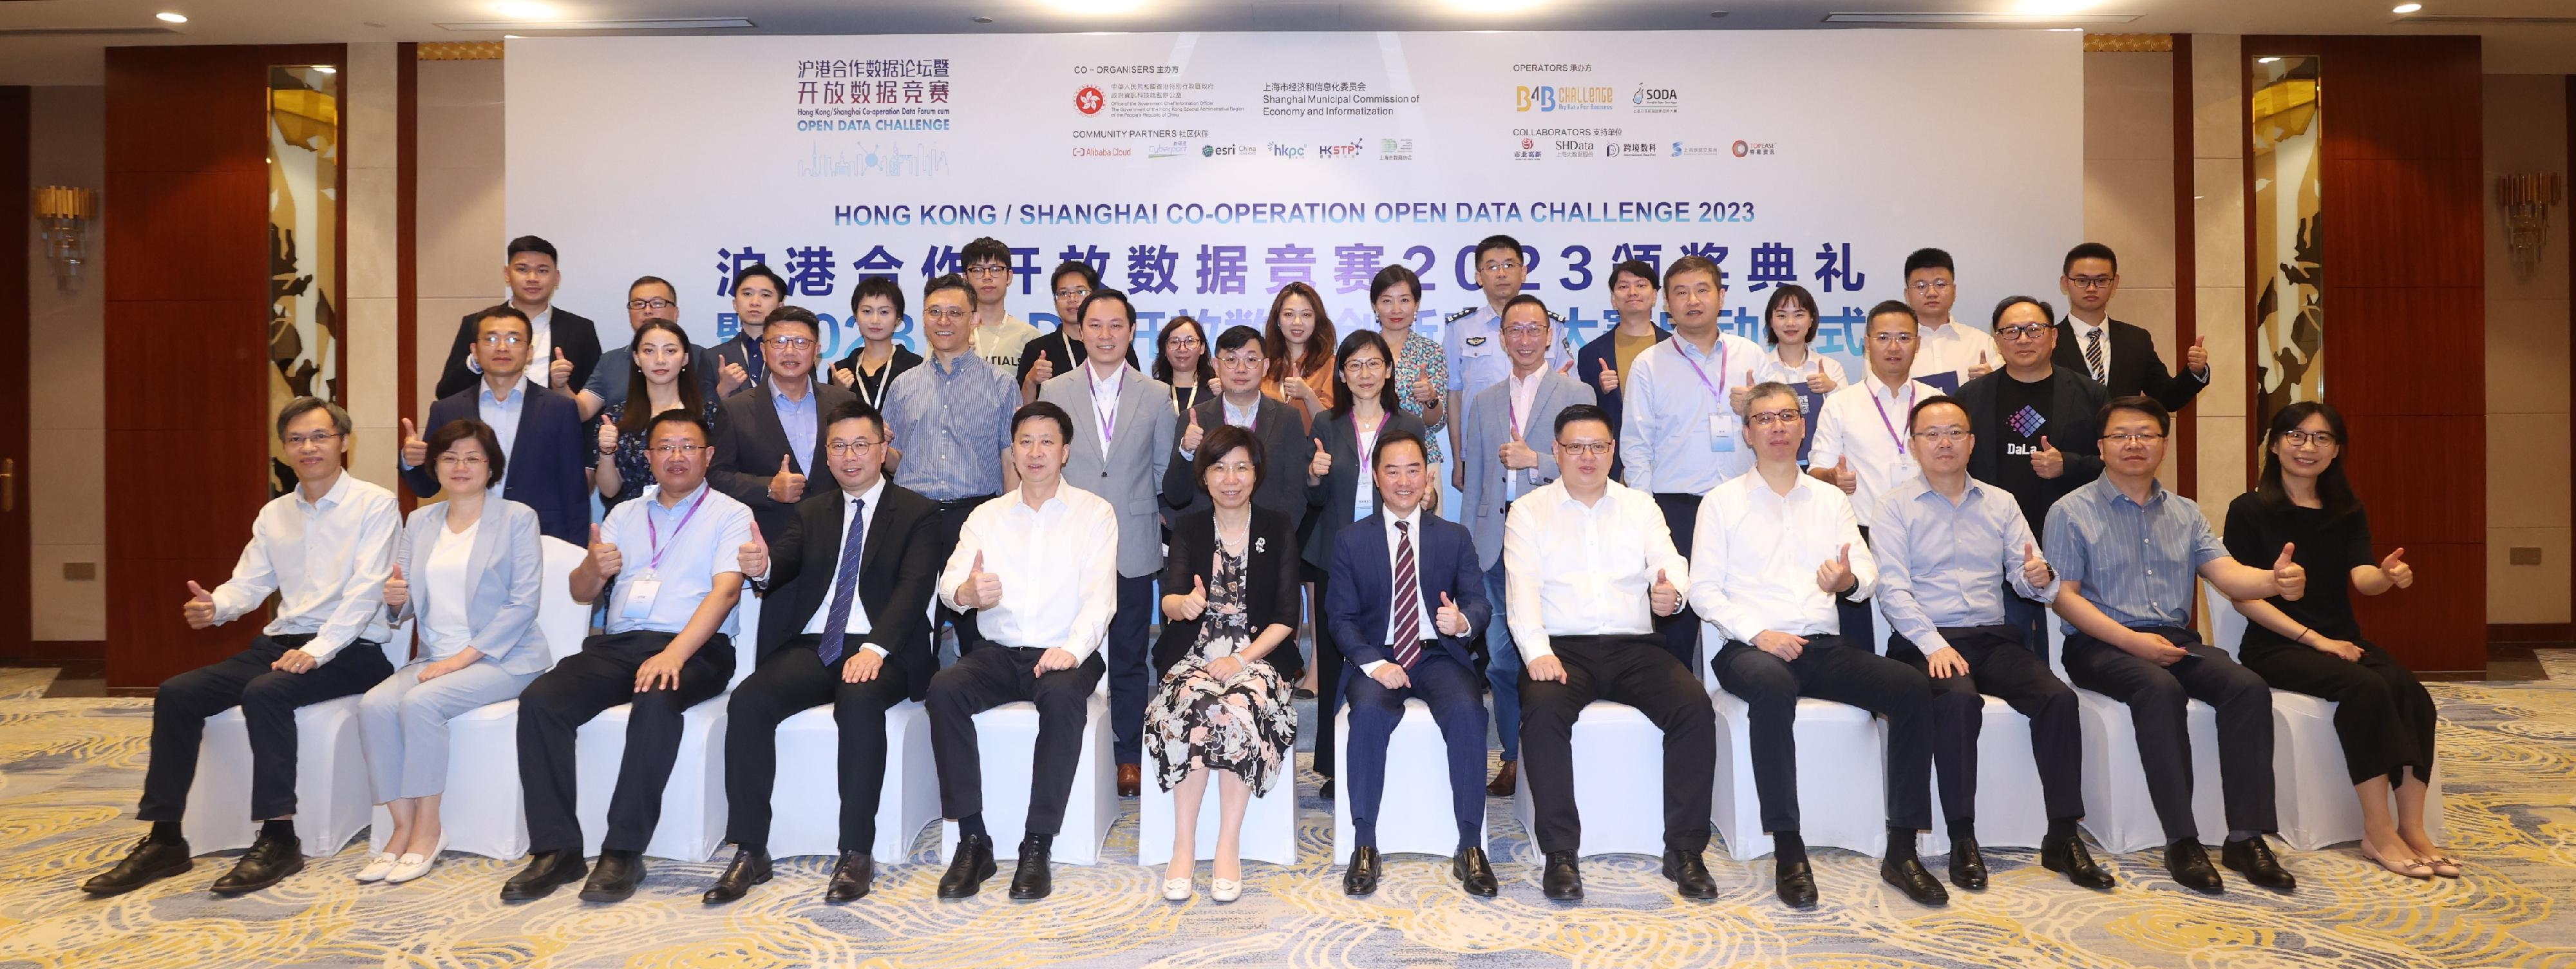 The Government Chief Information Officer, Mr Tony Wong (front row, sixth right), attends the Awards Presentation Ceremony of the first Hong Kong/Shanghai Co-operation Open Data Challenge in Shanghai today (August 14) and is pictured with the partners, judges and finalists of the competition.